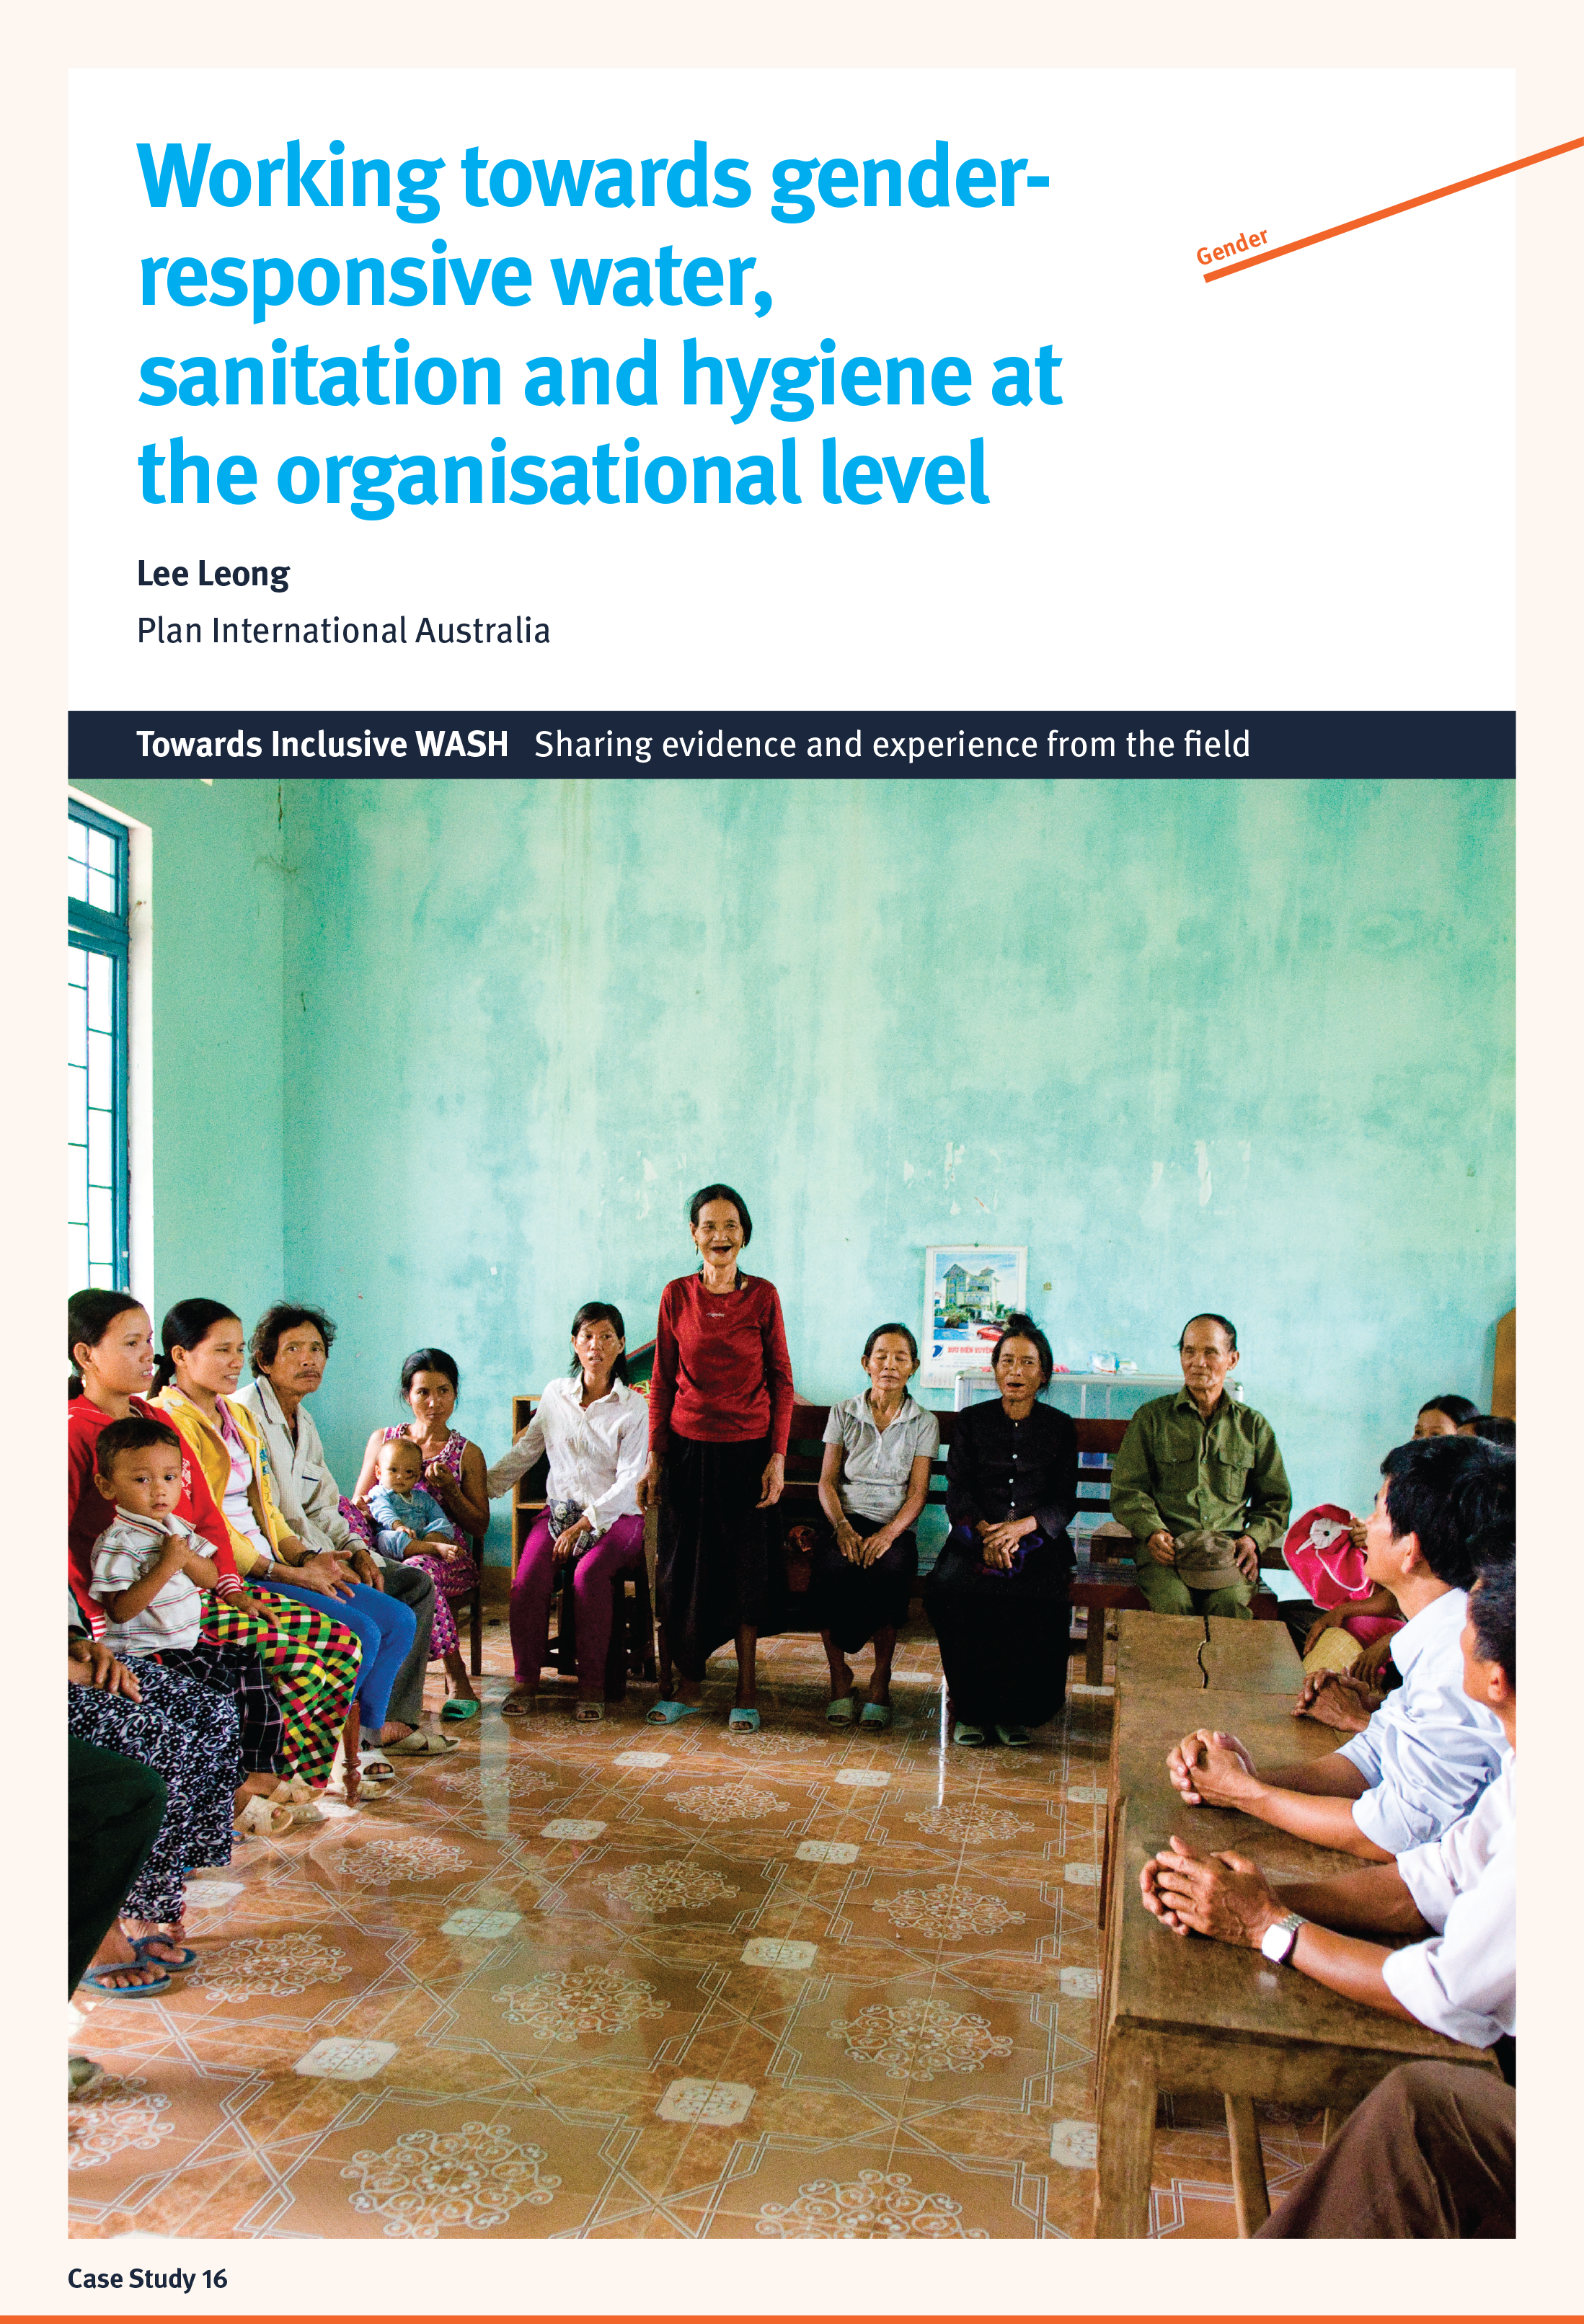 Working towards gender-responsive water, sanitation and hygiene at the organisational level